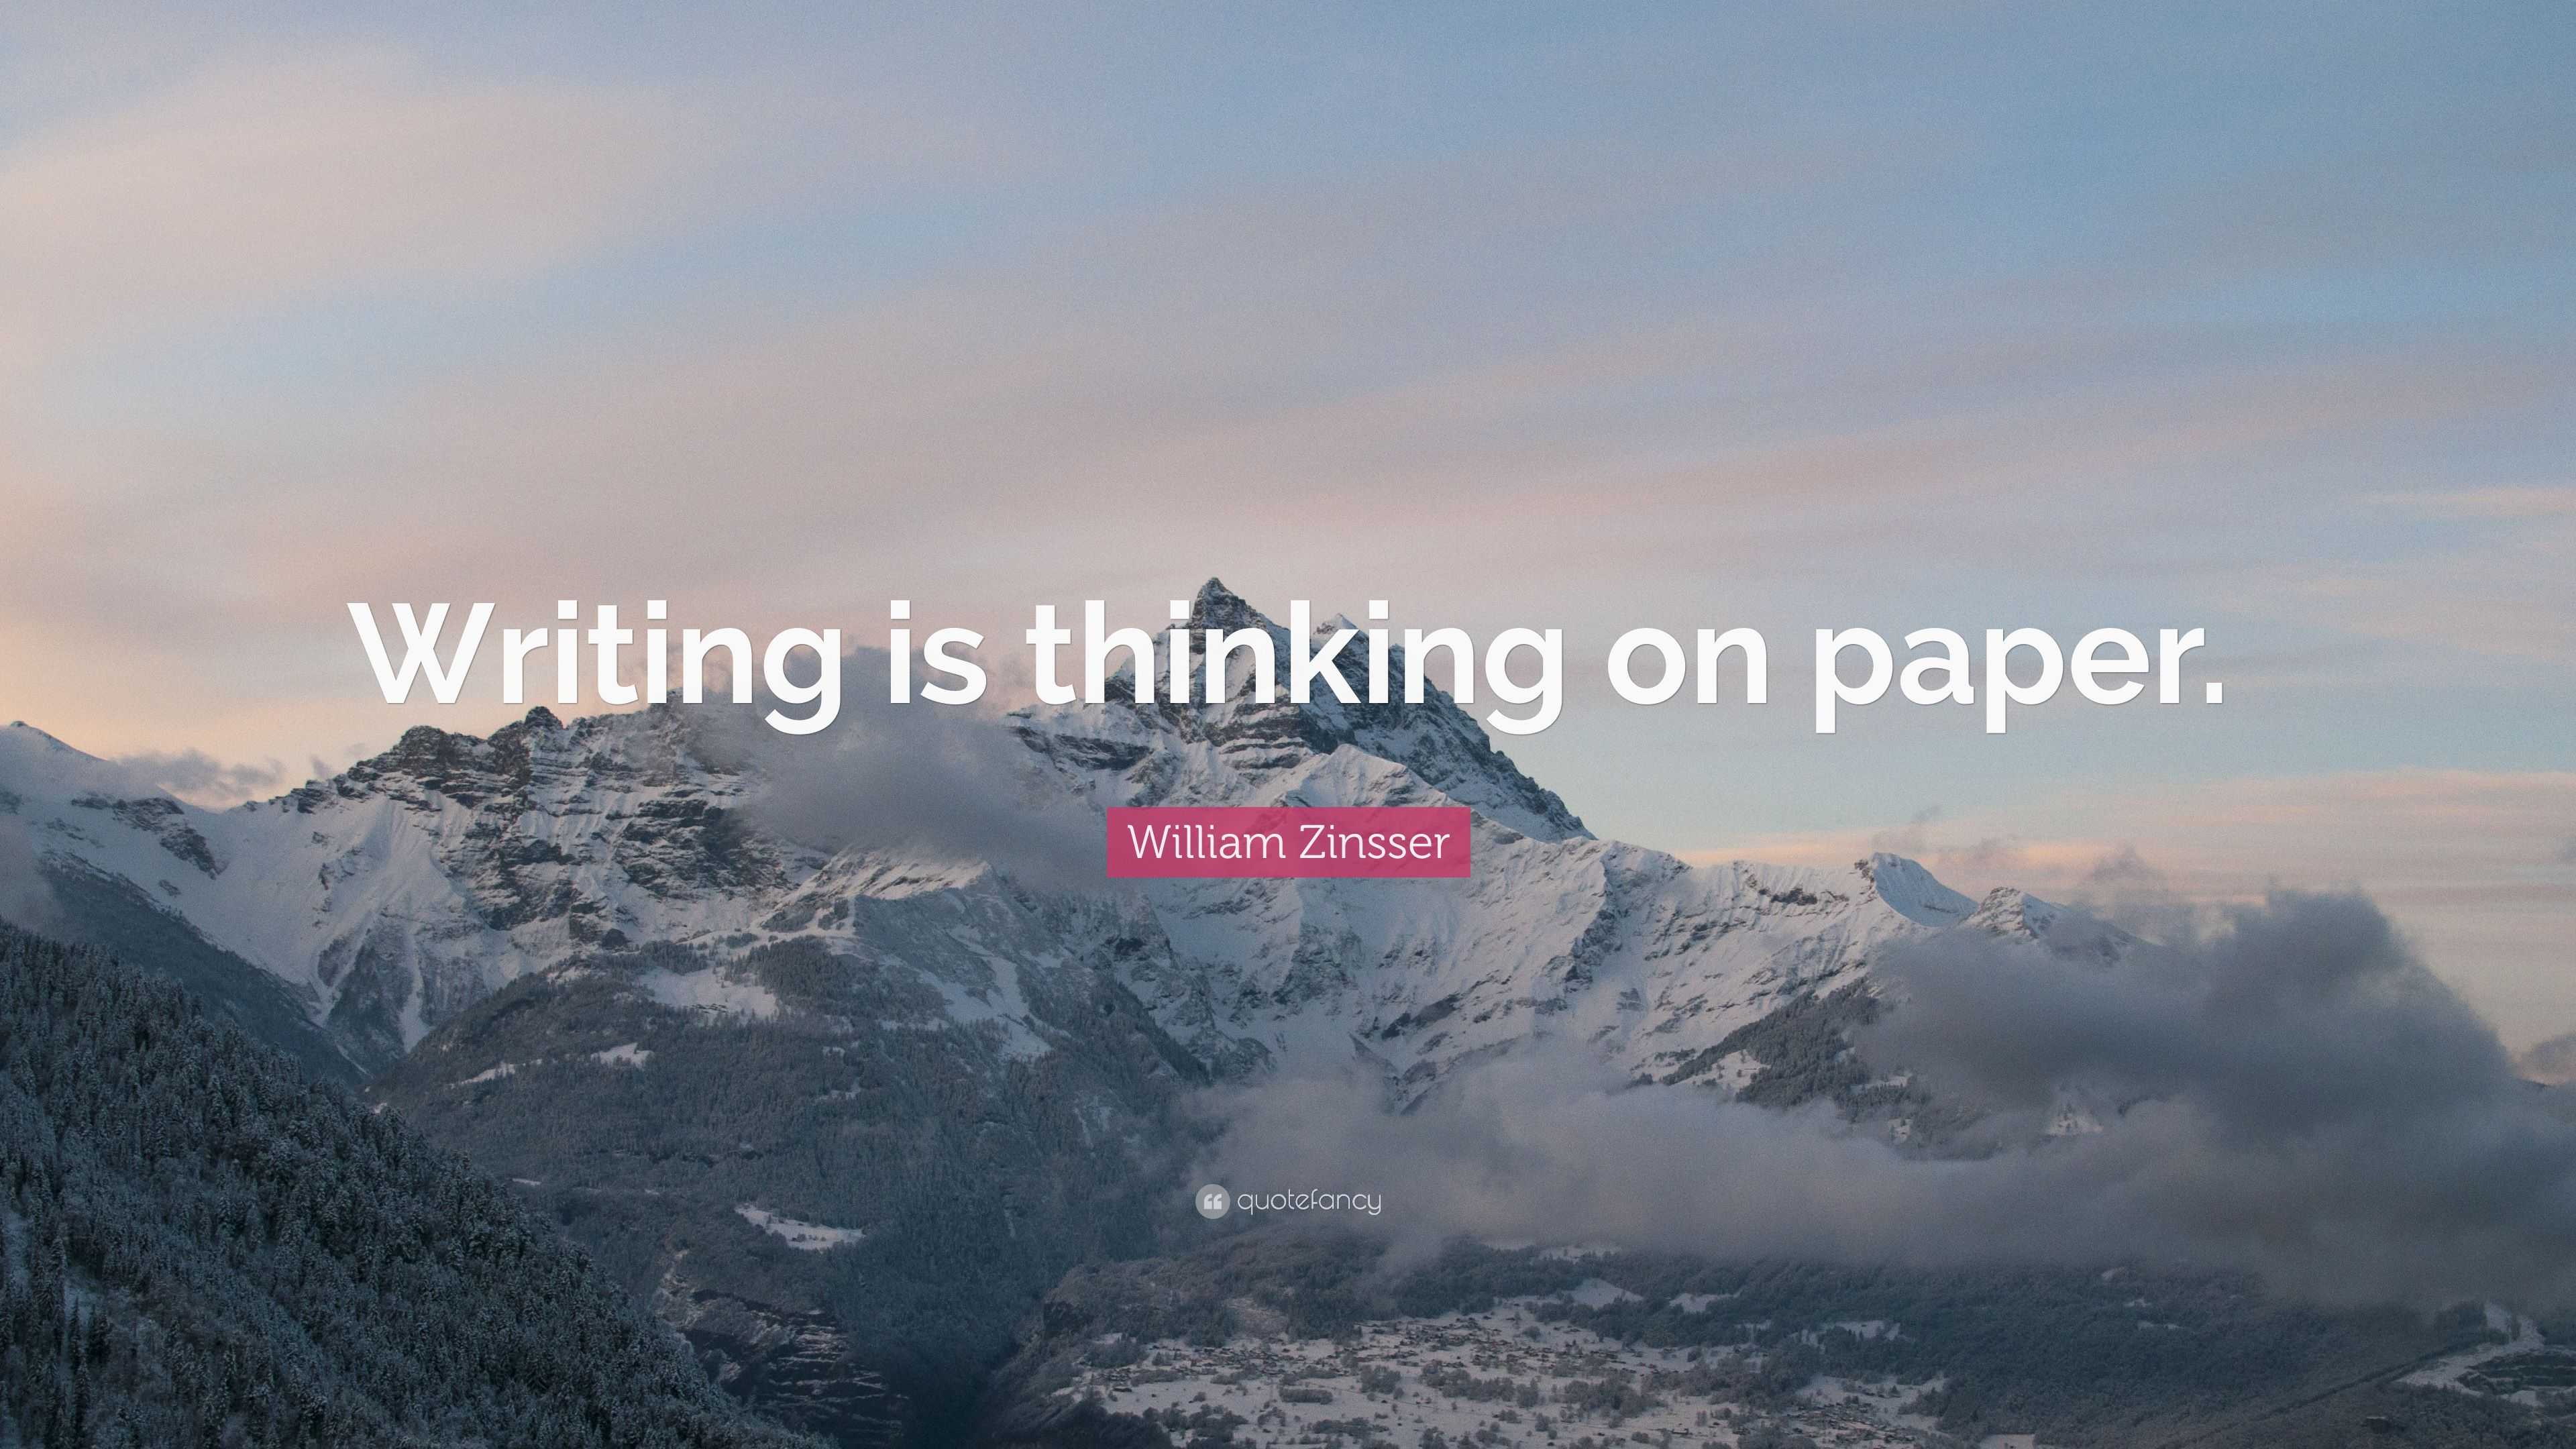 William Zinsser Quote: “Writing is thinking on paper.”